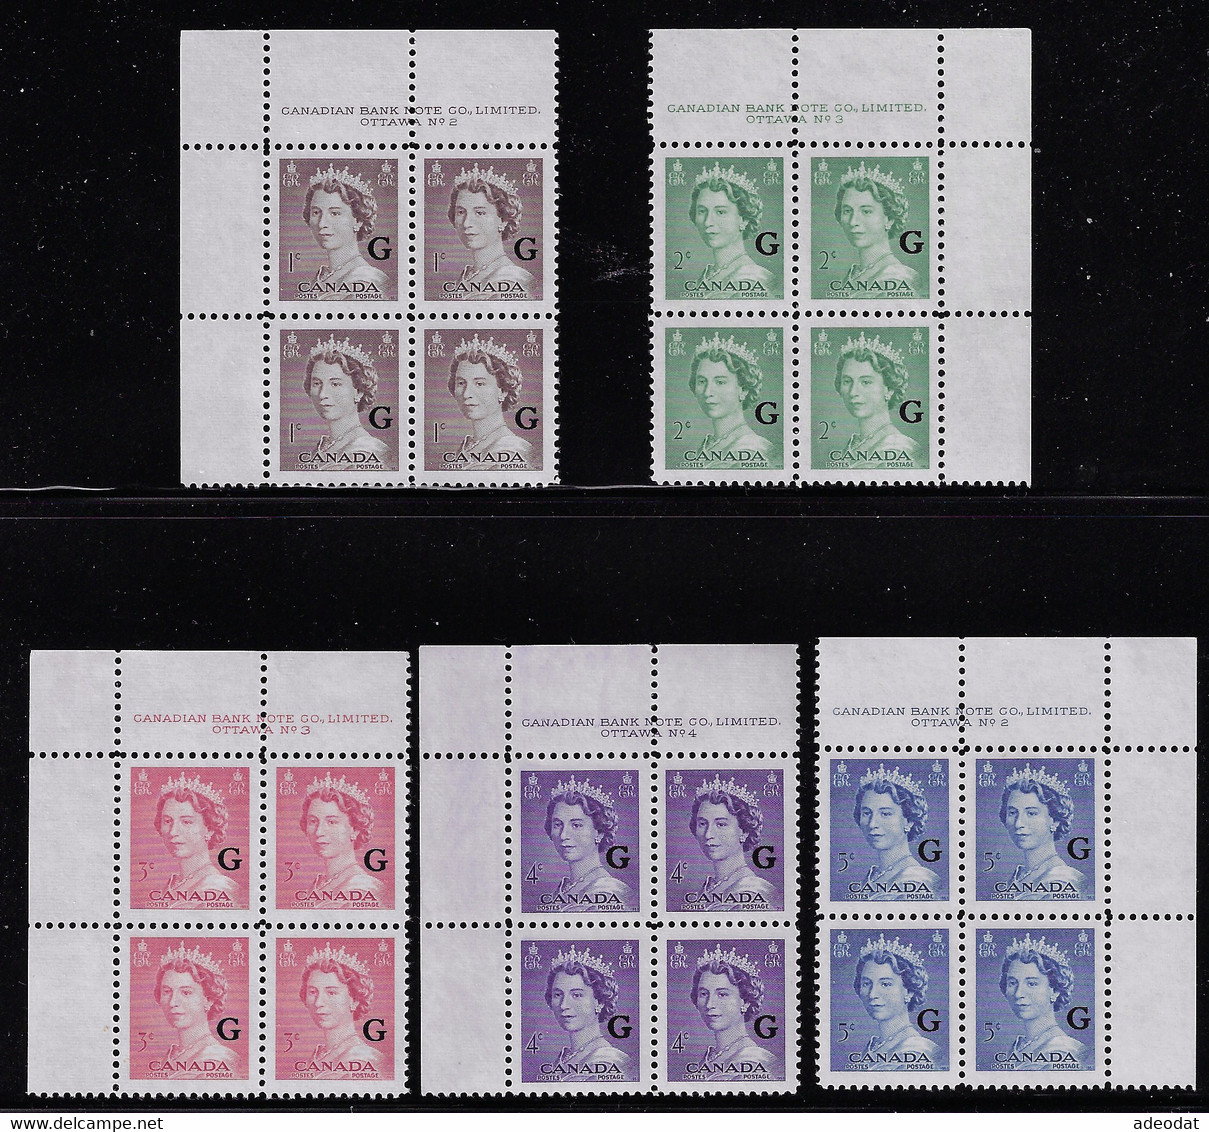 CANADA 1953 OFFICIAL STAMPS PLATE BLOCKS SCOTT O33-37 .jpg - Sovraccarichi